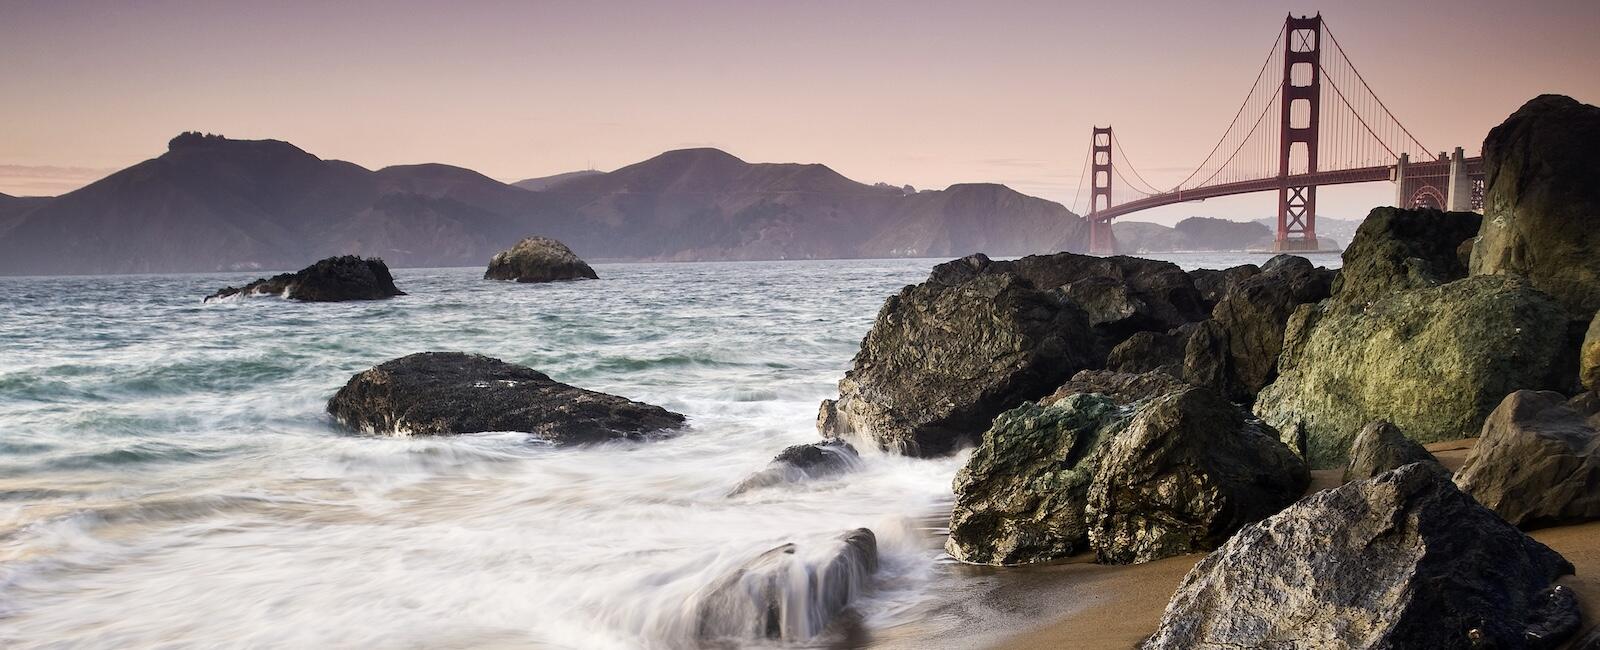 Waves crash over rocks at Marshall's Beach with Golden Gate Bridge in background.